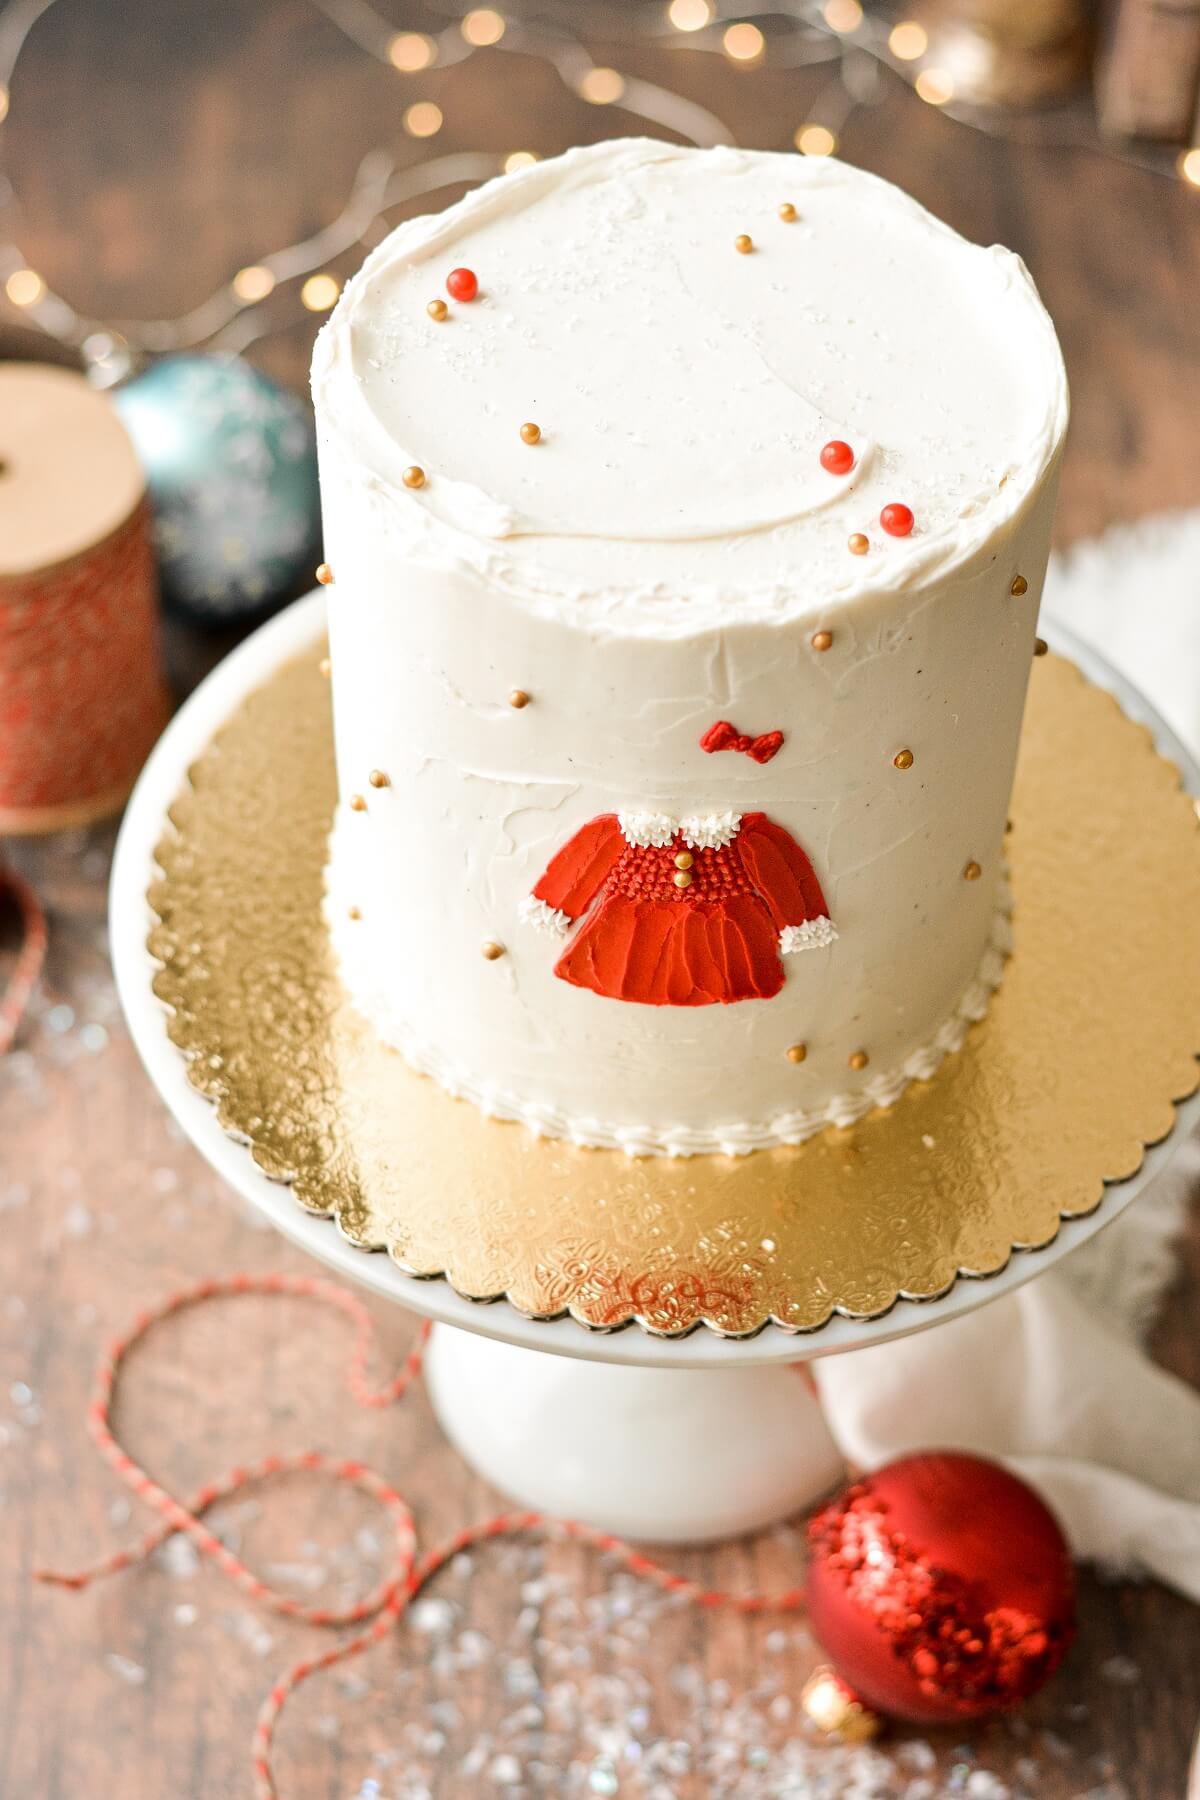 A Christmas cake with gold and red sugar pearls, ornaments, and a red Christmas dress painted on the cake in buttercream.